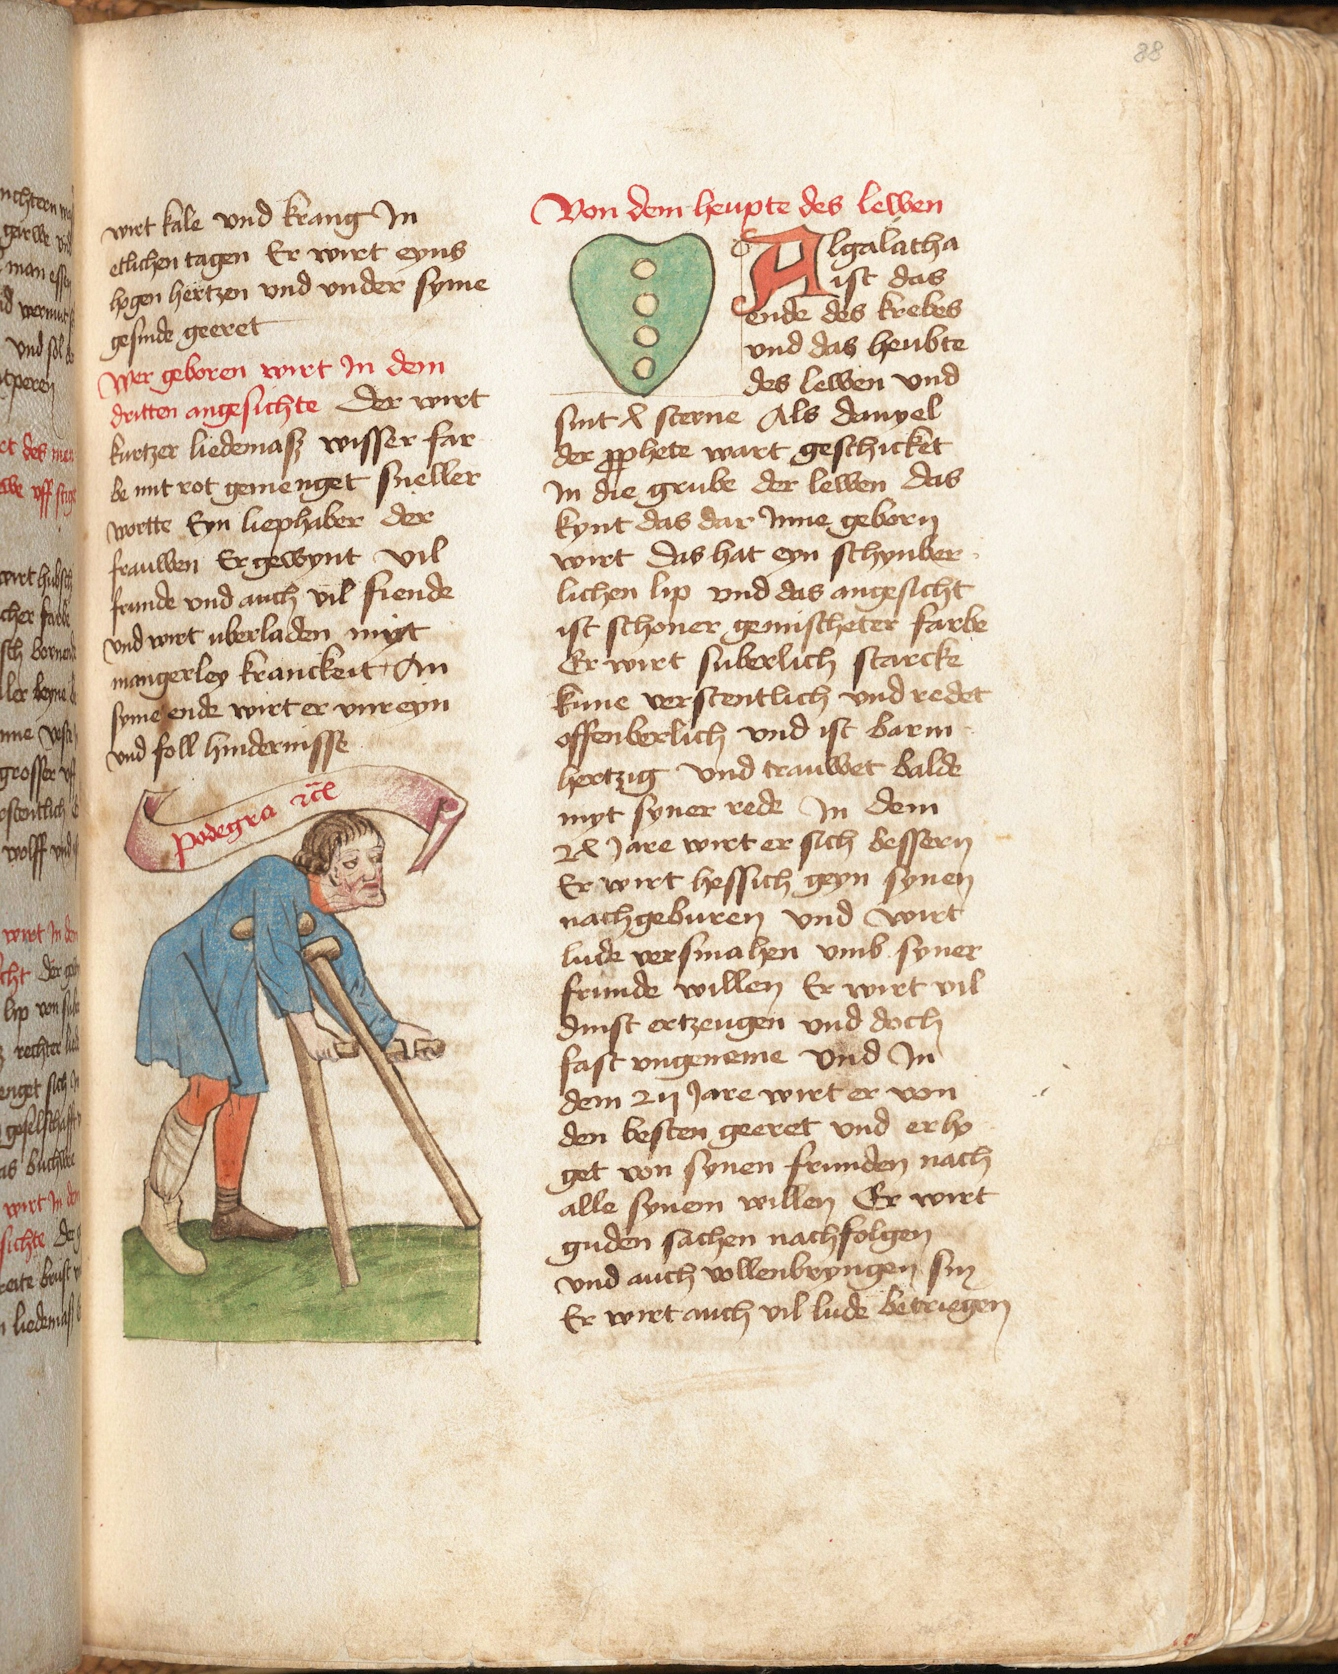 A page from a 15th century manuscript with two columns of gothic text and an illustration in the left column of a man leaning forward as he uses a pair of crutches with shoulder supports and handles further down the length of the crutches.